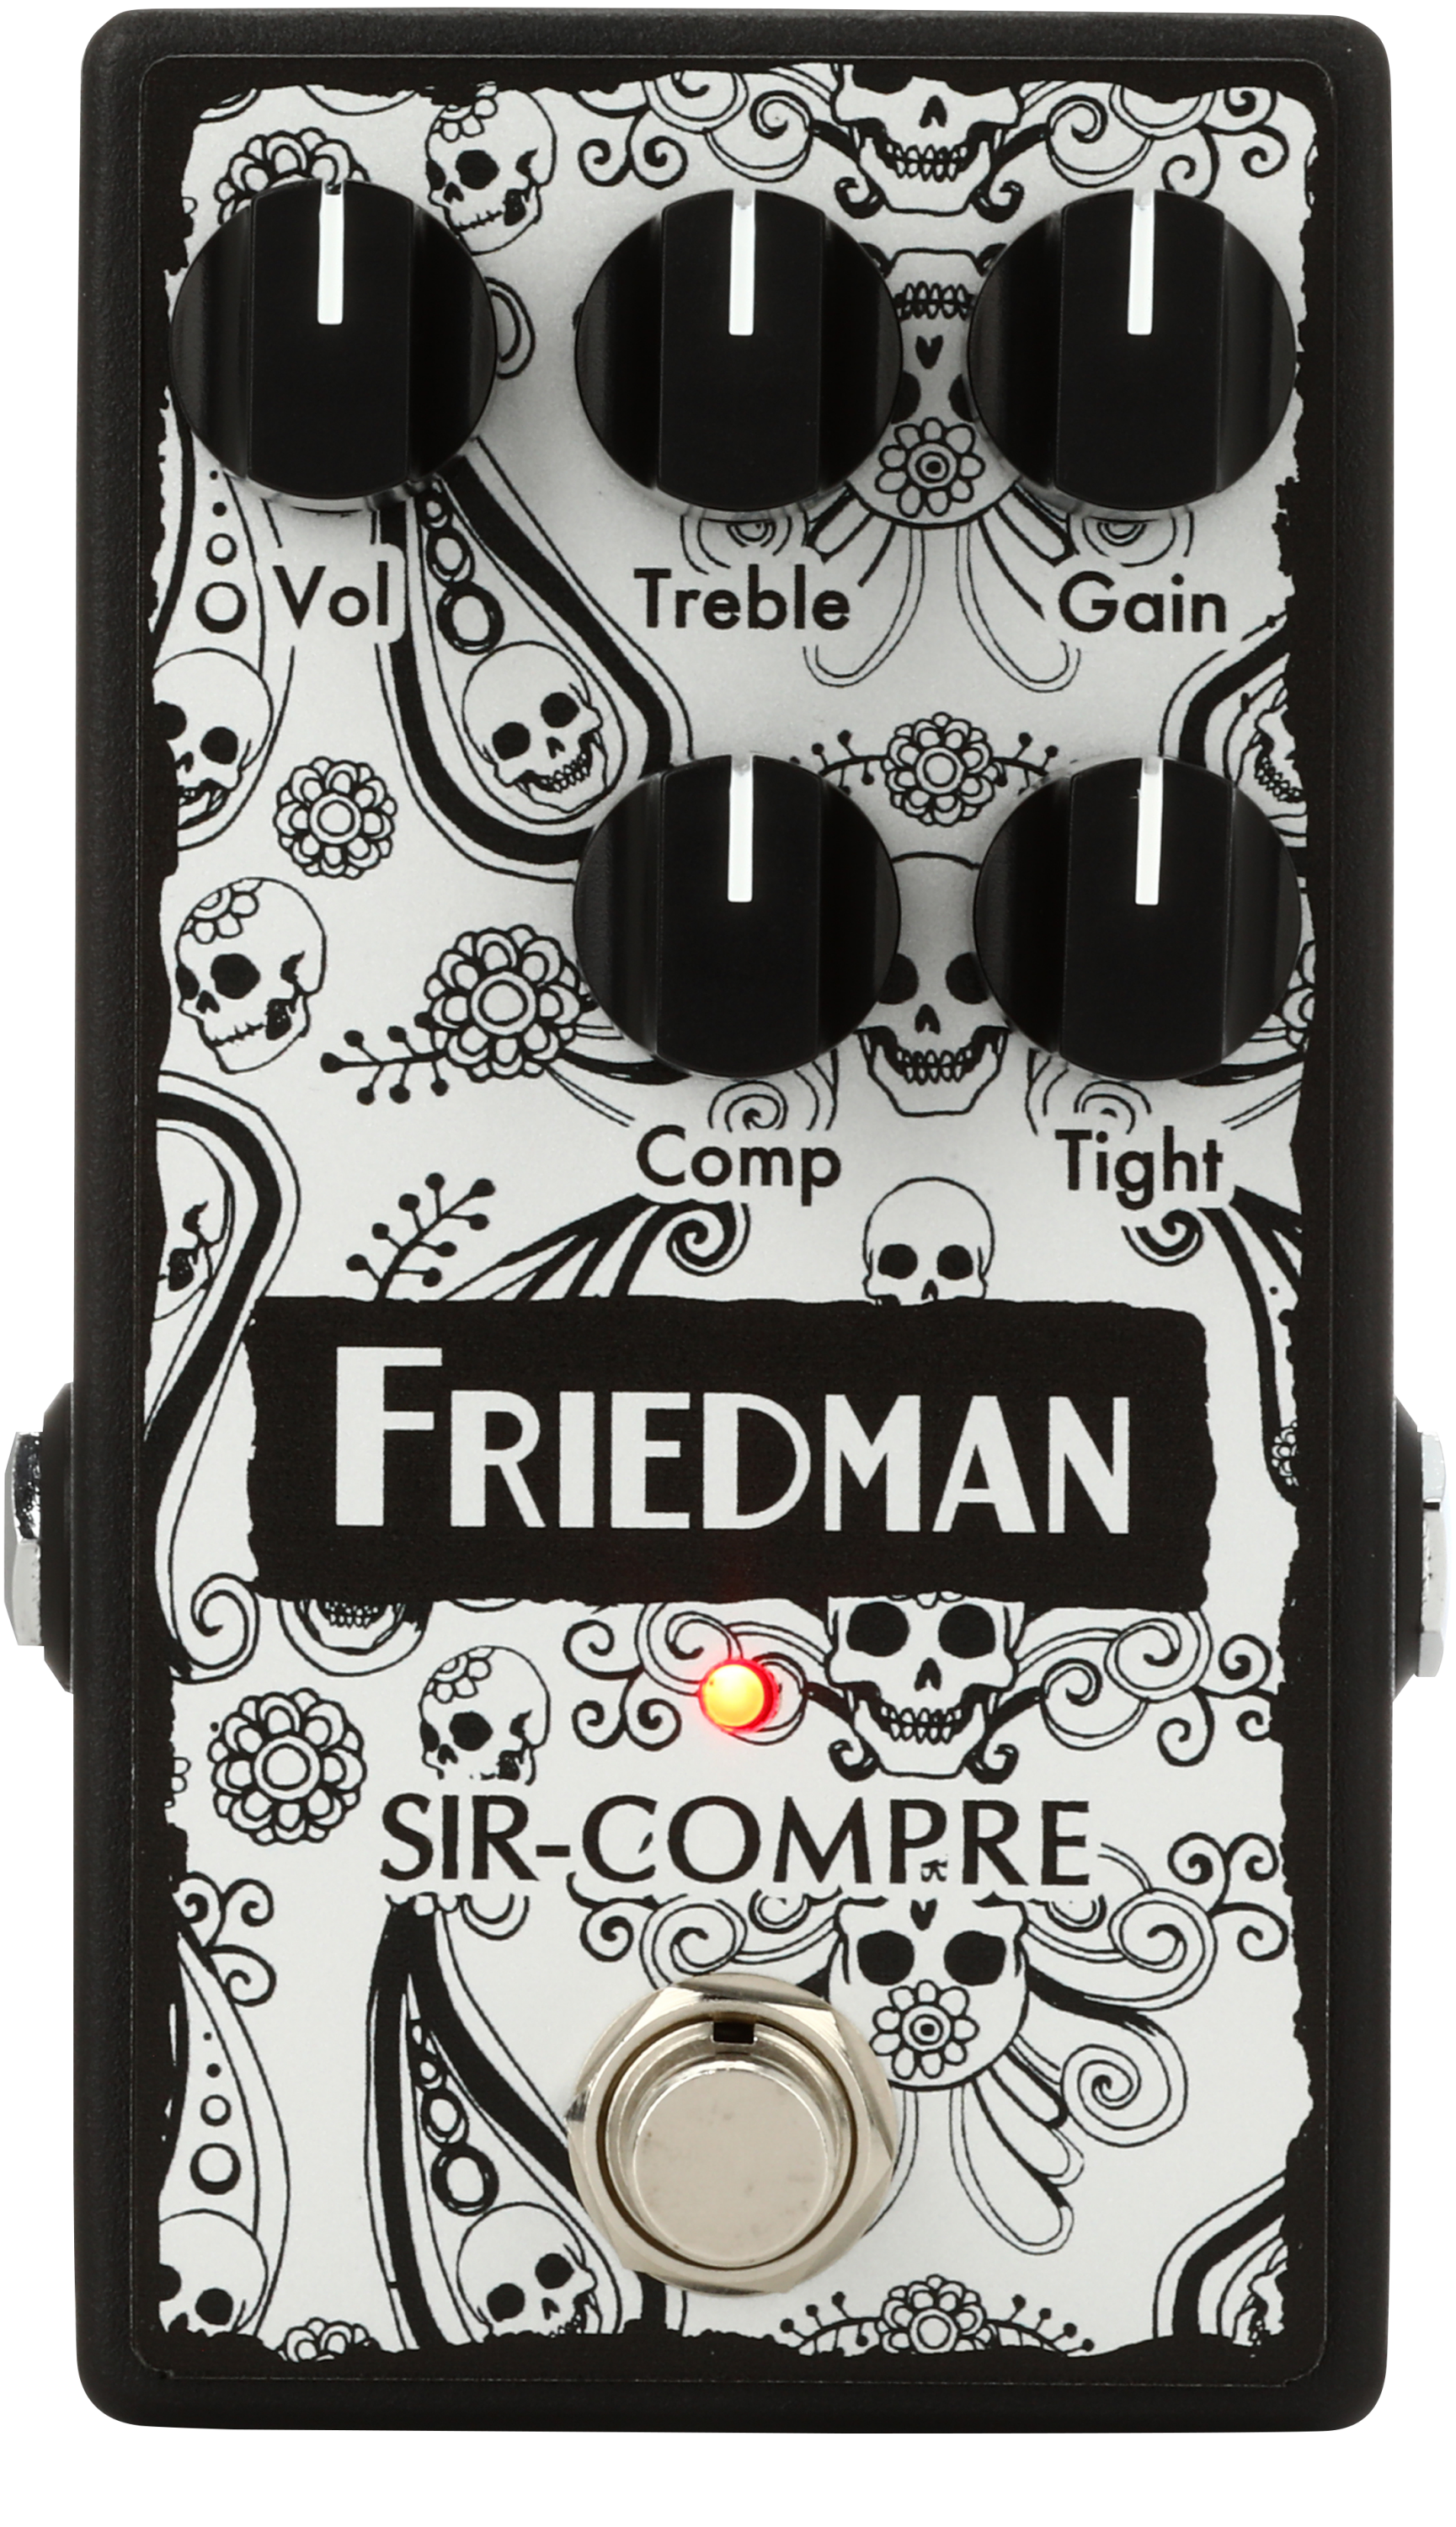 Friedman Sir Compre LTD Compressor Pedal with Overdrive - Artisan Edition  Sweetwater Exclusive